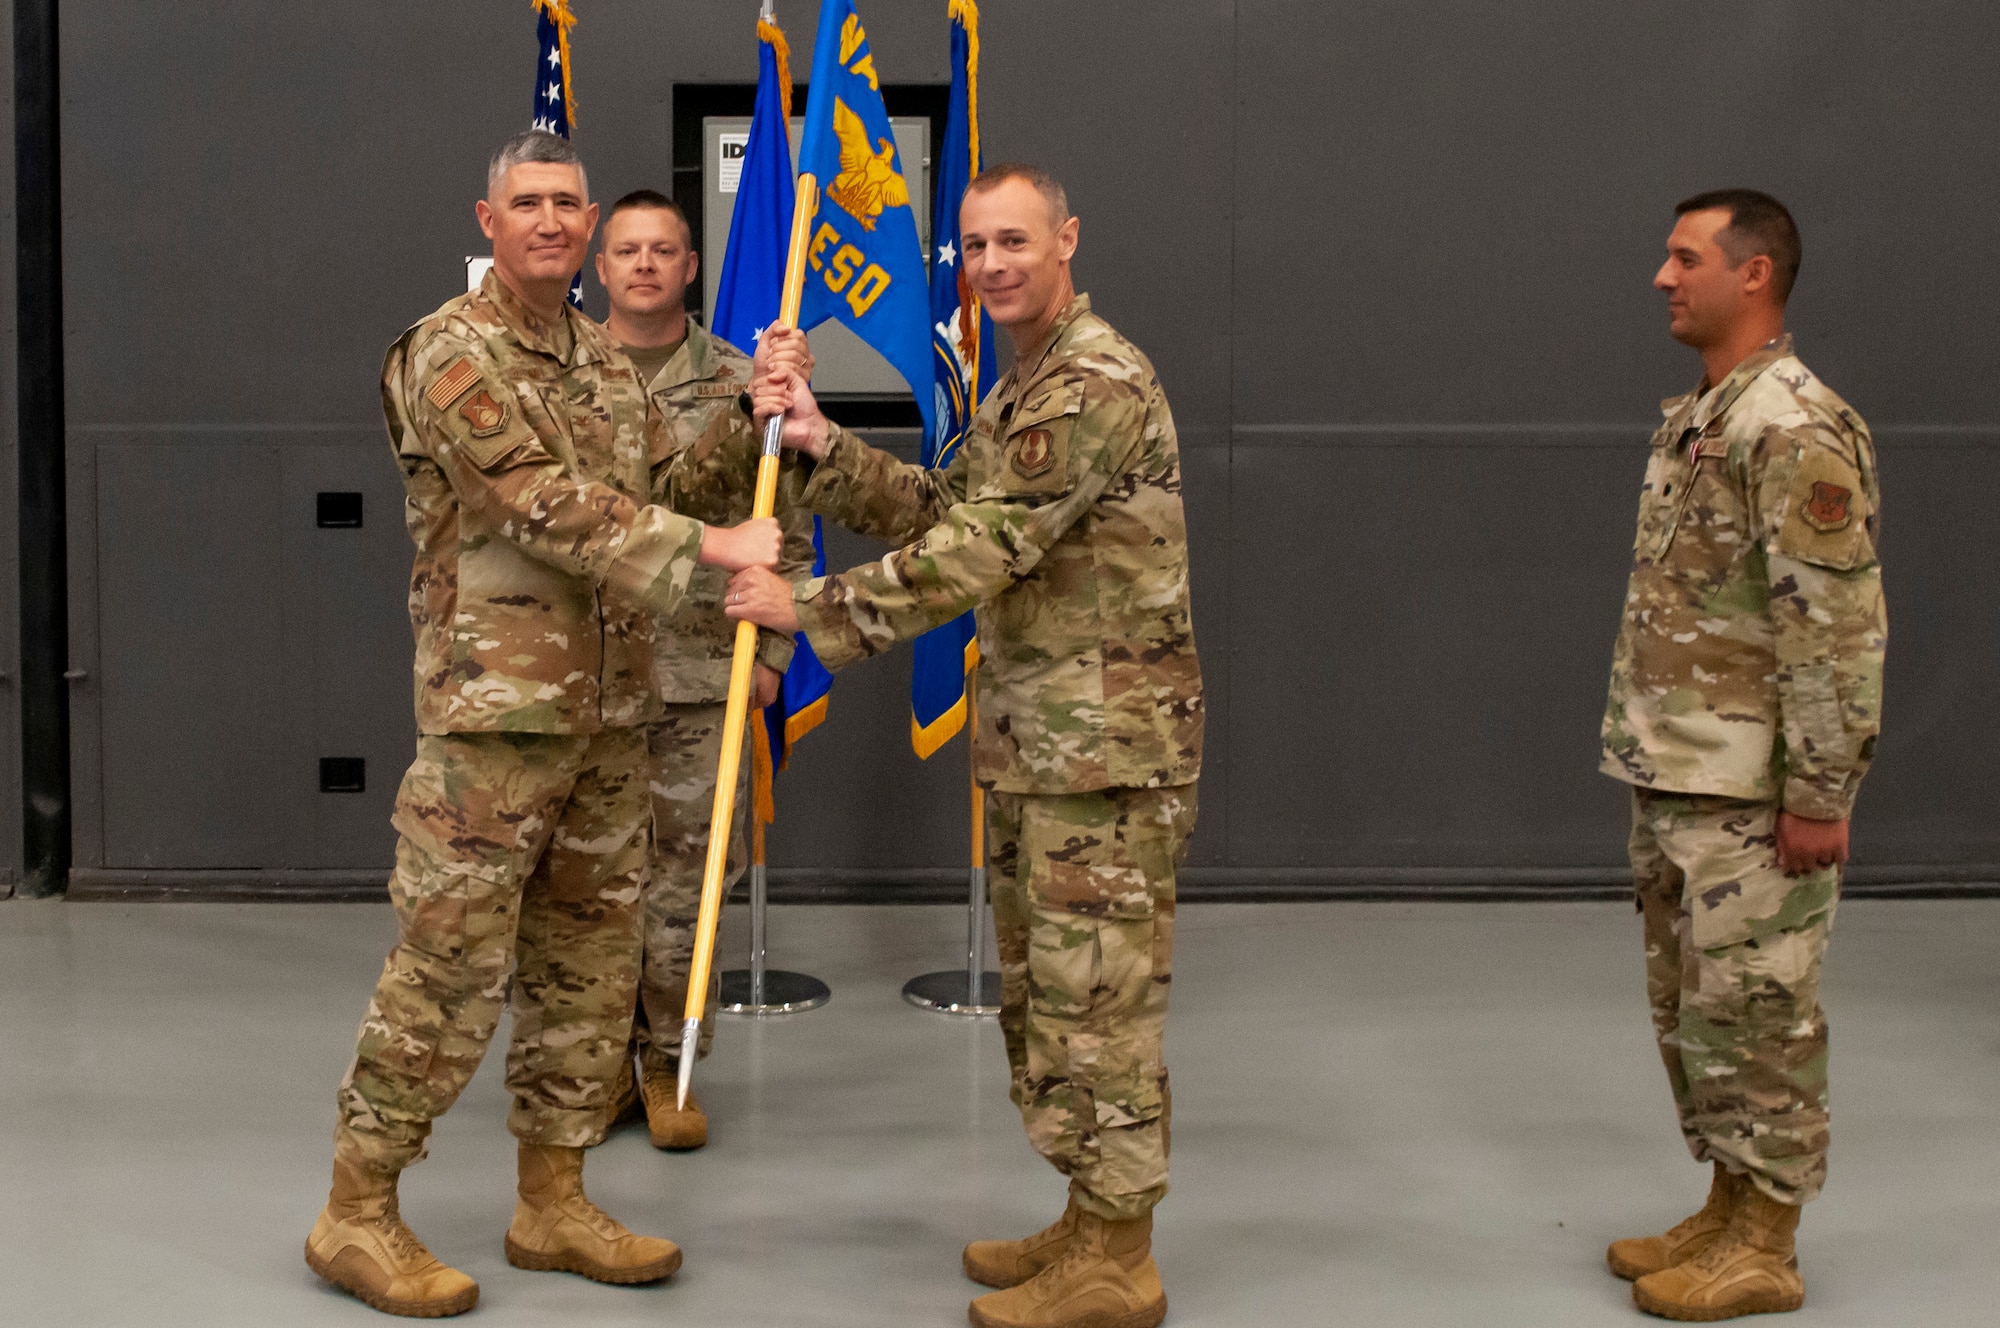 Lt. Col. Noel Humber Foreign Materiel Exploitation commander, accepts the guidon from Col. Kenneth Stremmel, Global Exploitation Intelligence commander during the Foreign Materiel Exploitation change of command June 6, 2022 here. Humber previously worked at the Air Force Research Laboratory, Systems Technology Office, before taking over the Foreign Materiel Exploitation squadron. The Foreign Materiel Exploitation is tasked with delivering unique, timely, and detailed foreign materiel exploitation intelligence on air, space and cyberspace system capabilities and vulnerabilities to support operational efforts, acquisition programs, and policy decisions.